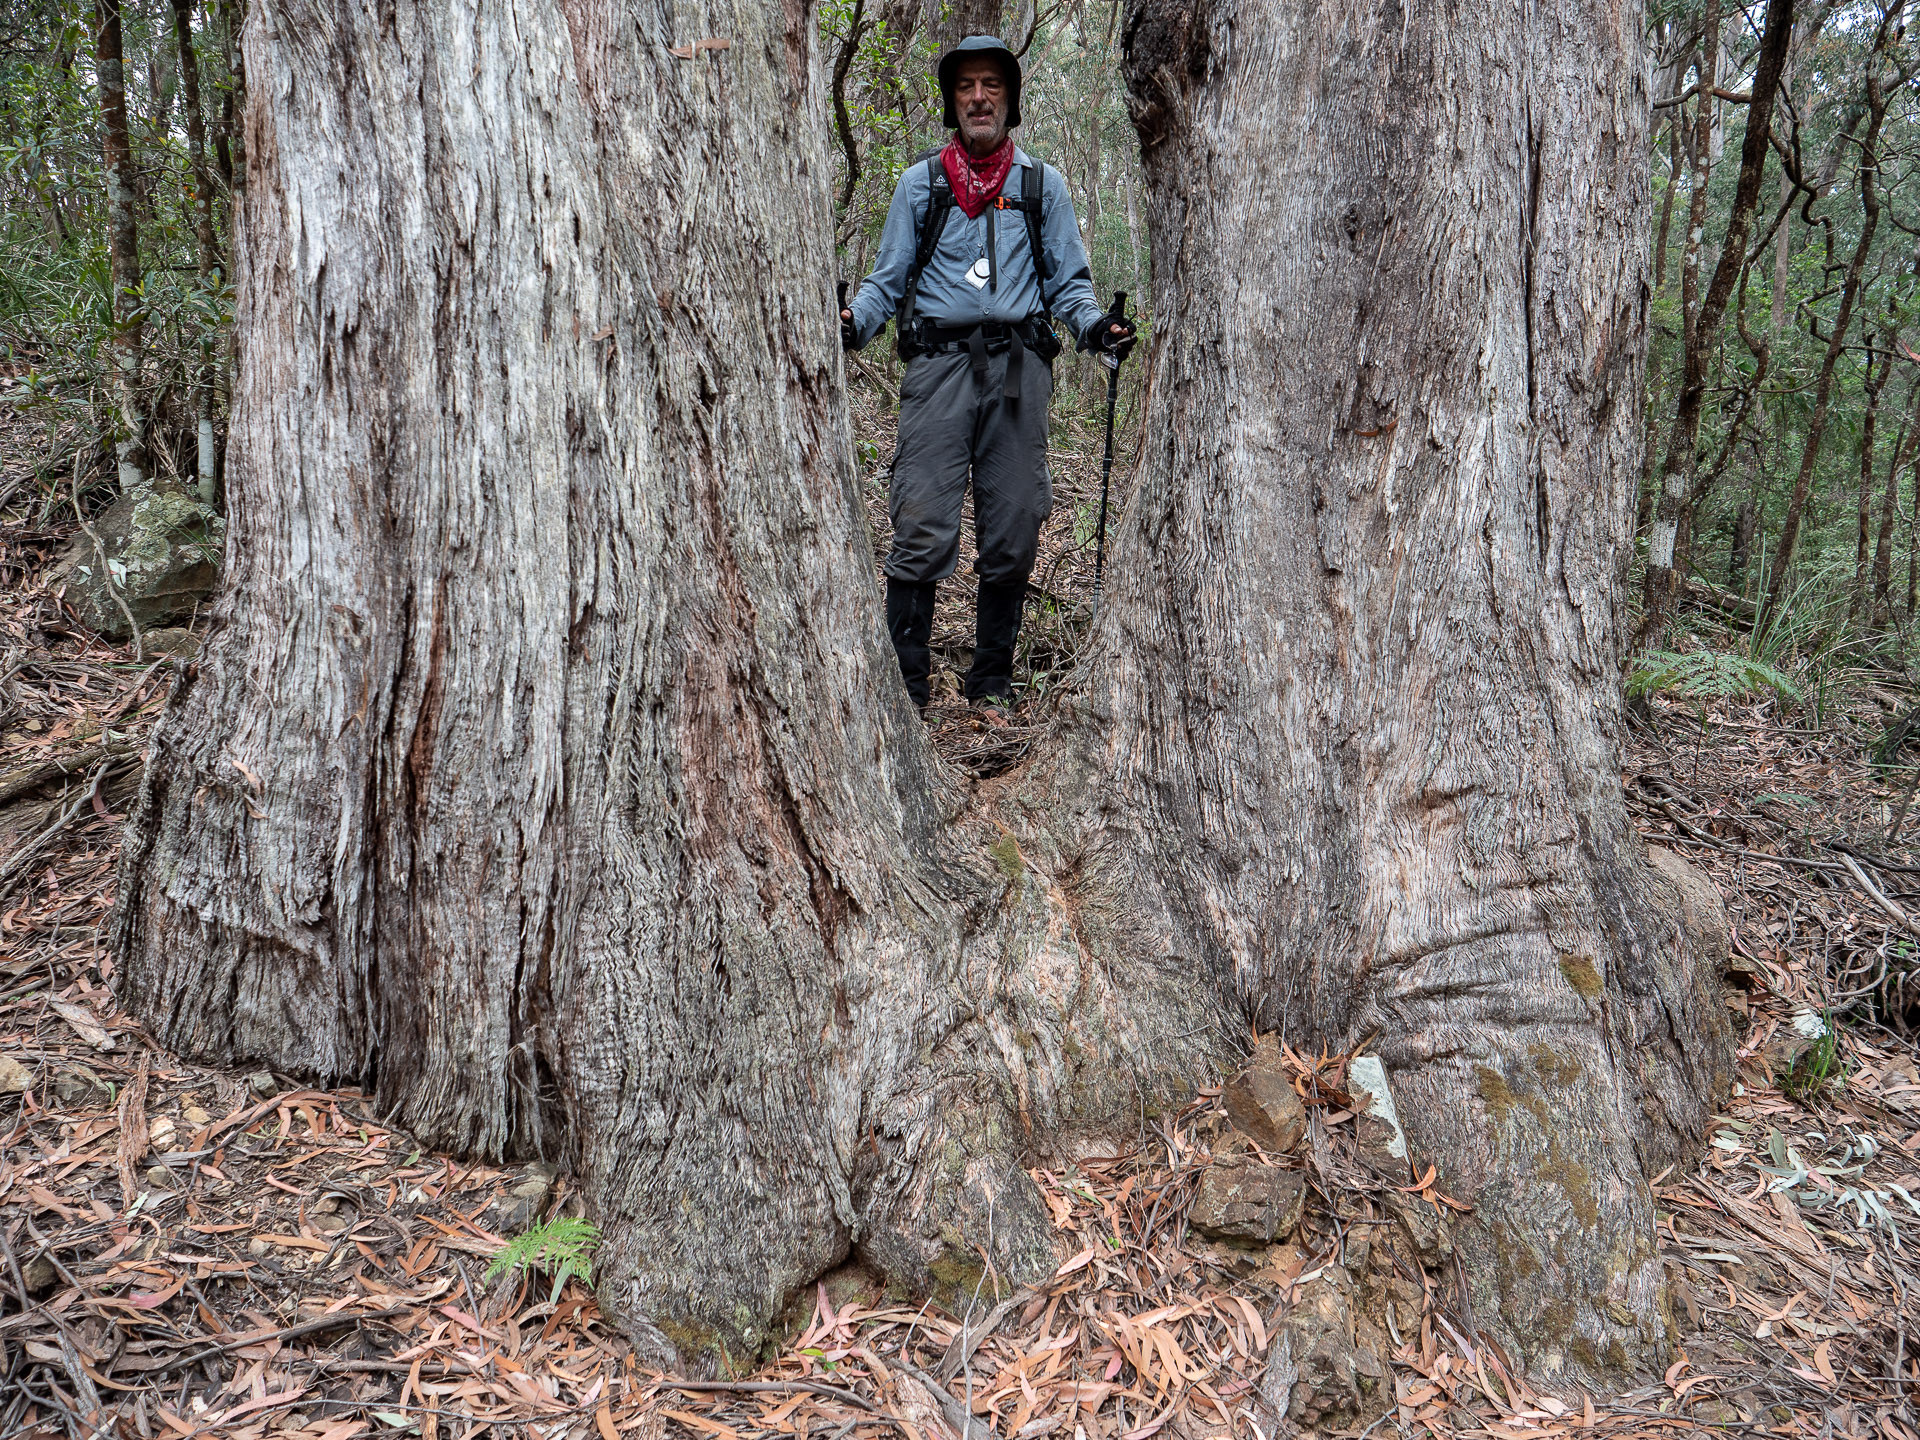 Edward dwarfed by a pair of eucalypts in Nowendoc National Park (image G. Luscombe)